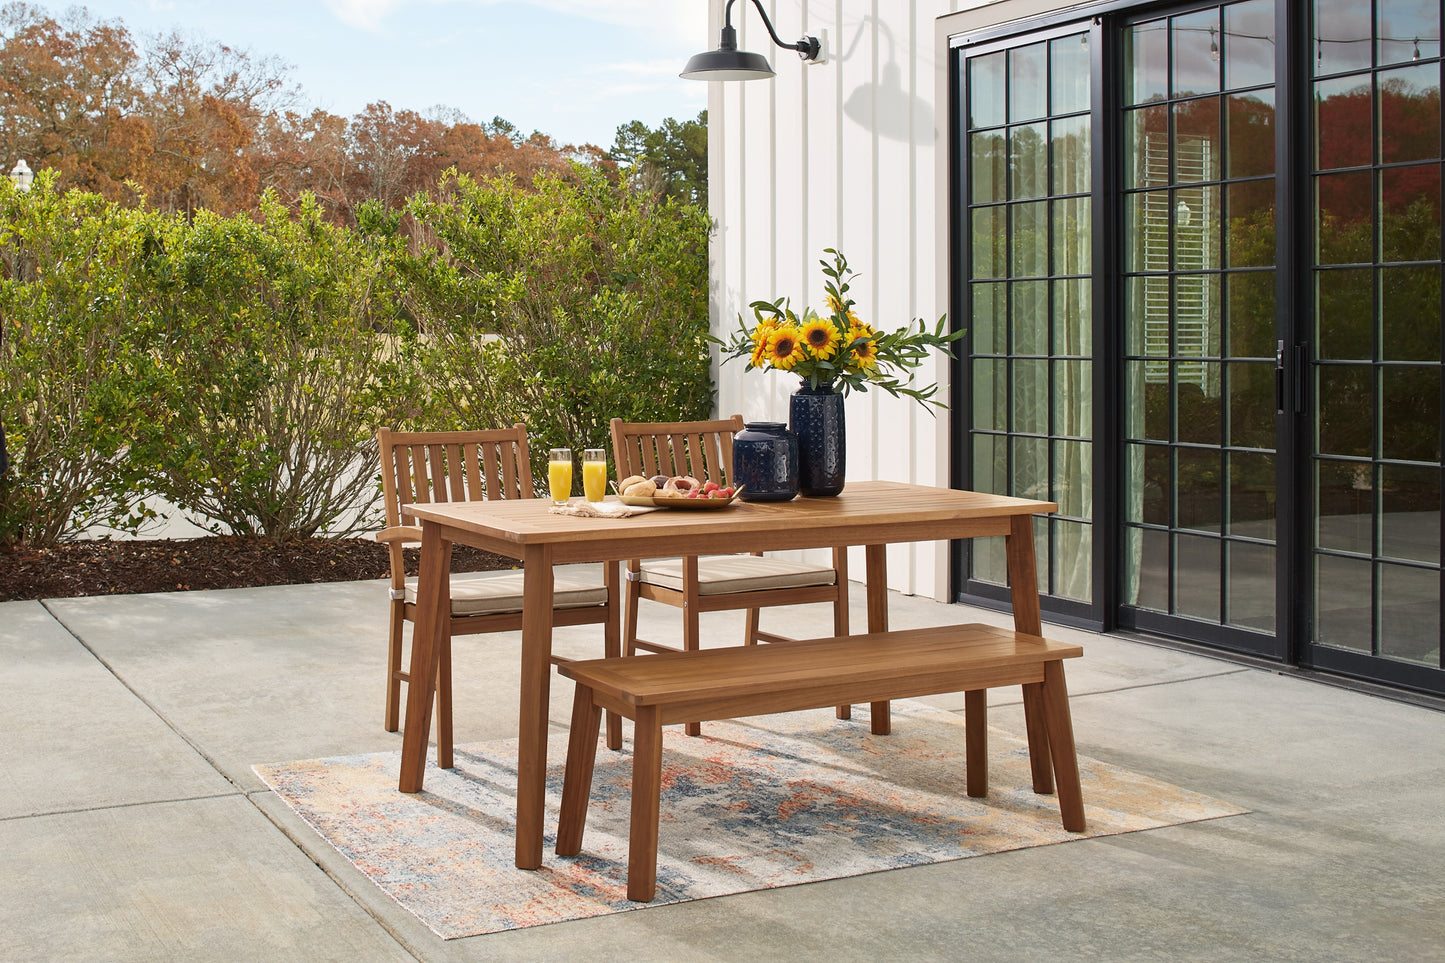 Janiyah Outdoor Dining Table and 2 Chairs and Bench JB's Furniture  Home Furniture, Home Decor, Furniture Store